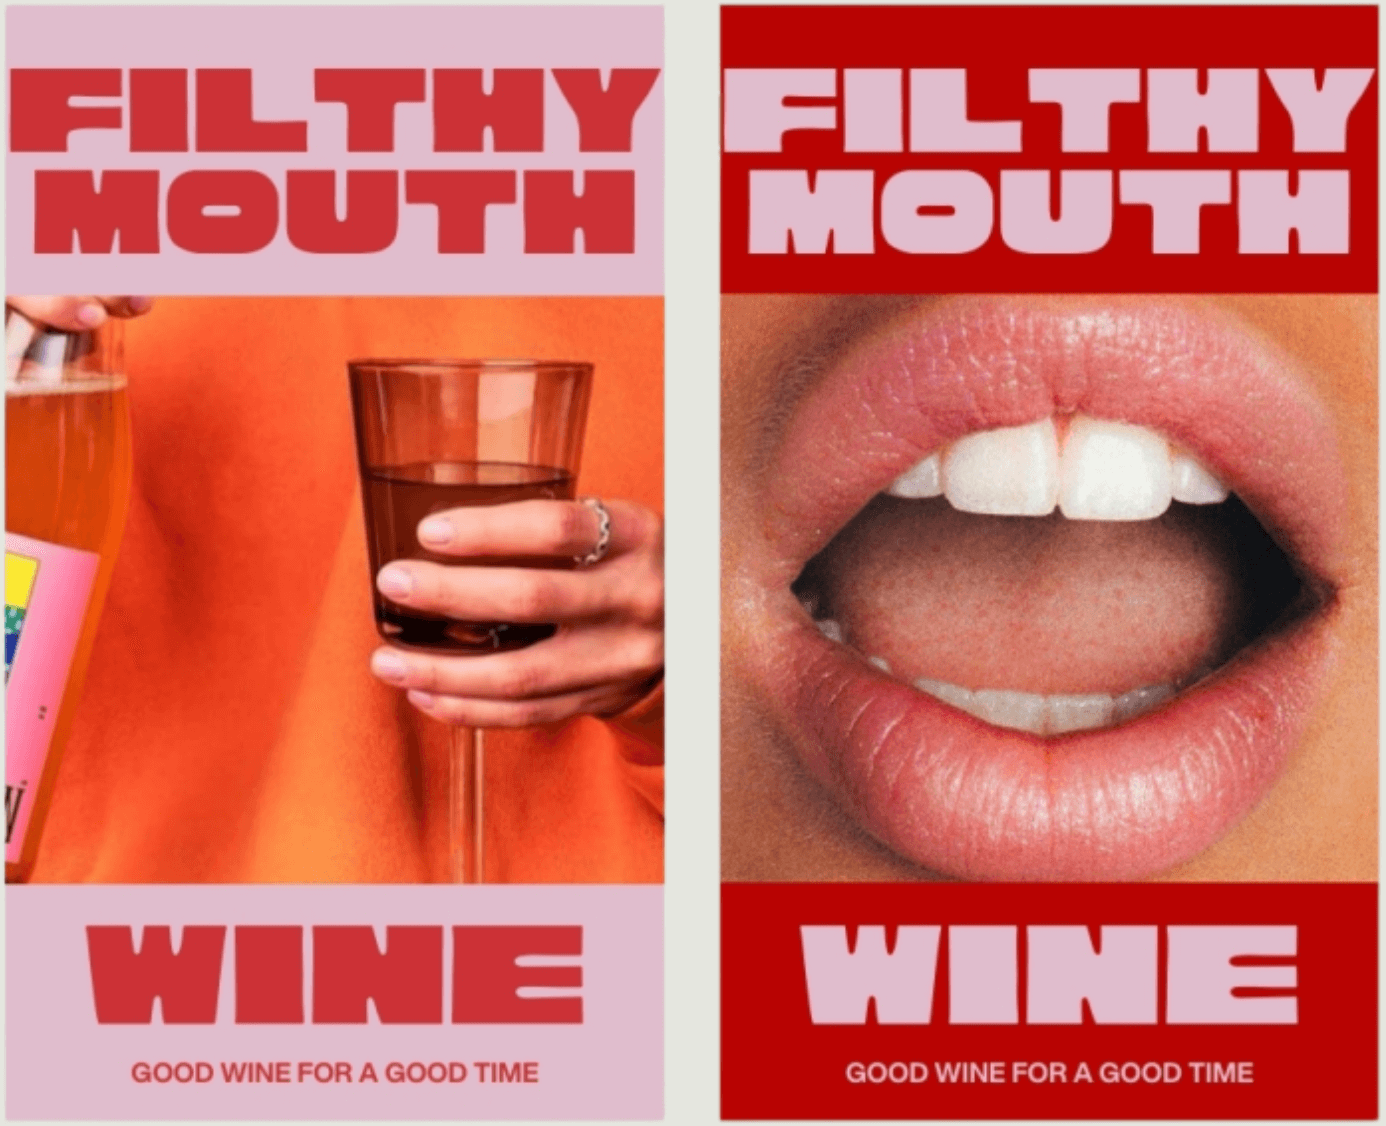 Social media graphics made by Brand Rich for Filthy Mouth wines.